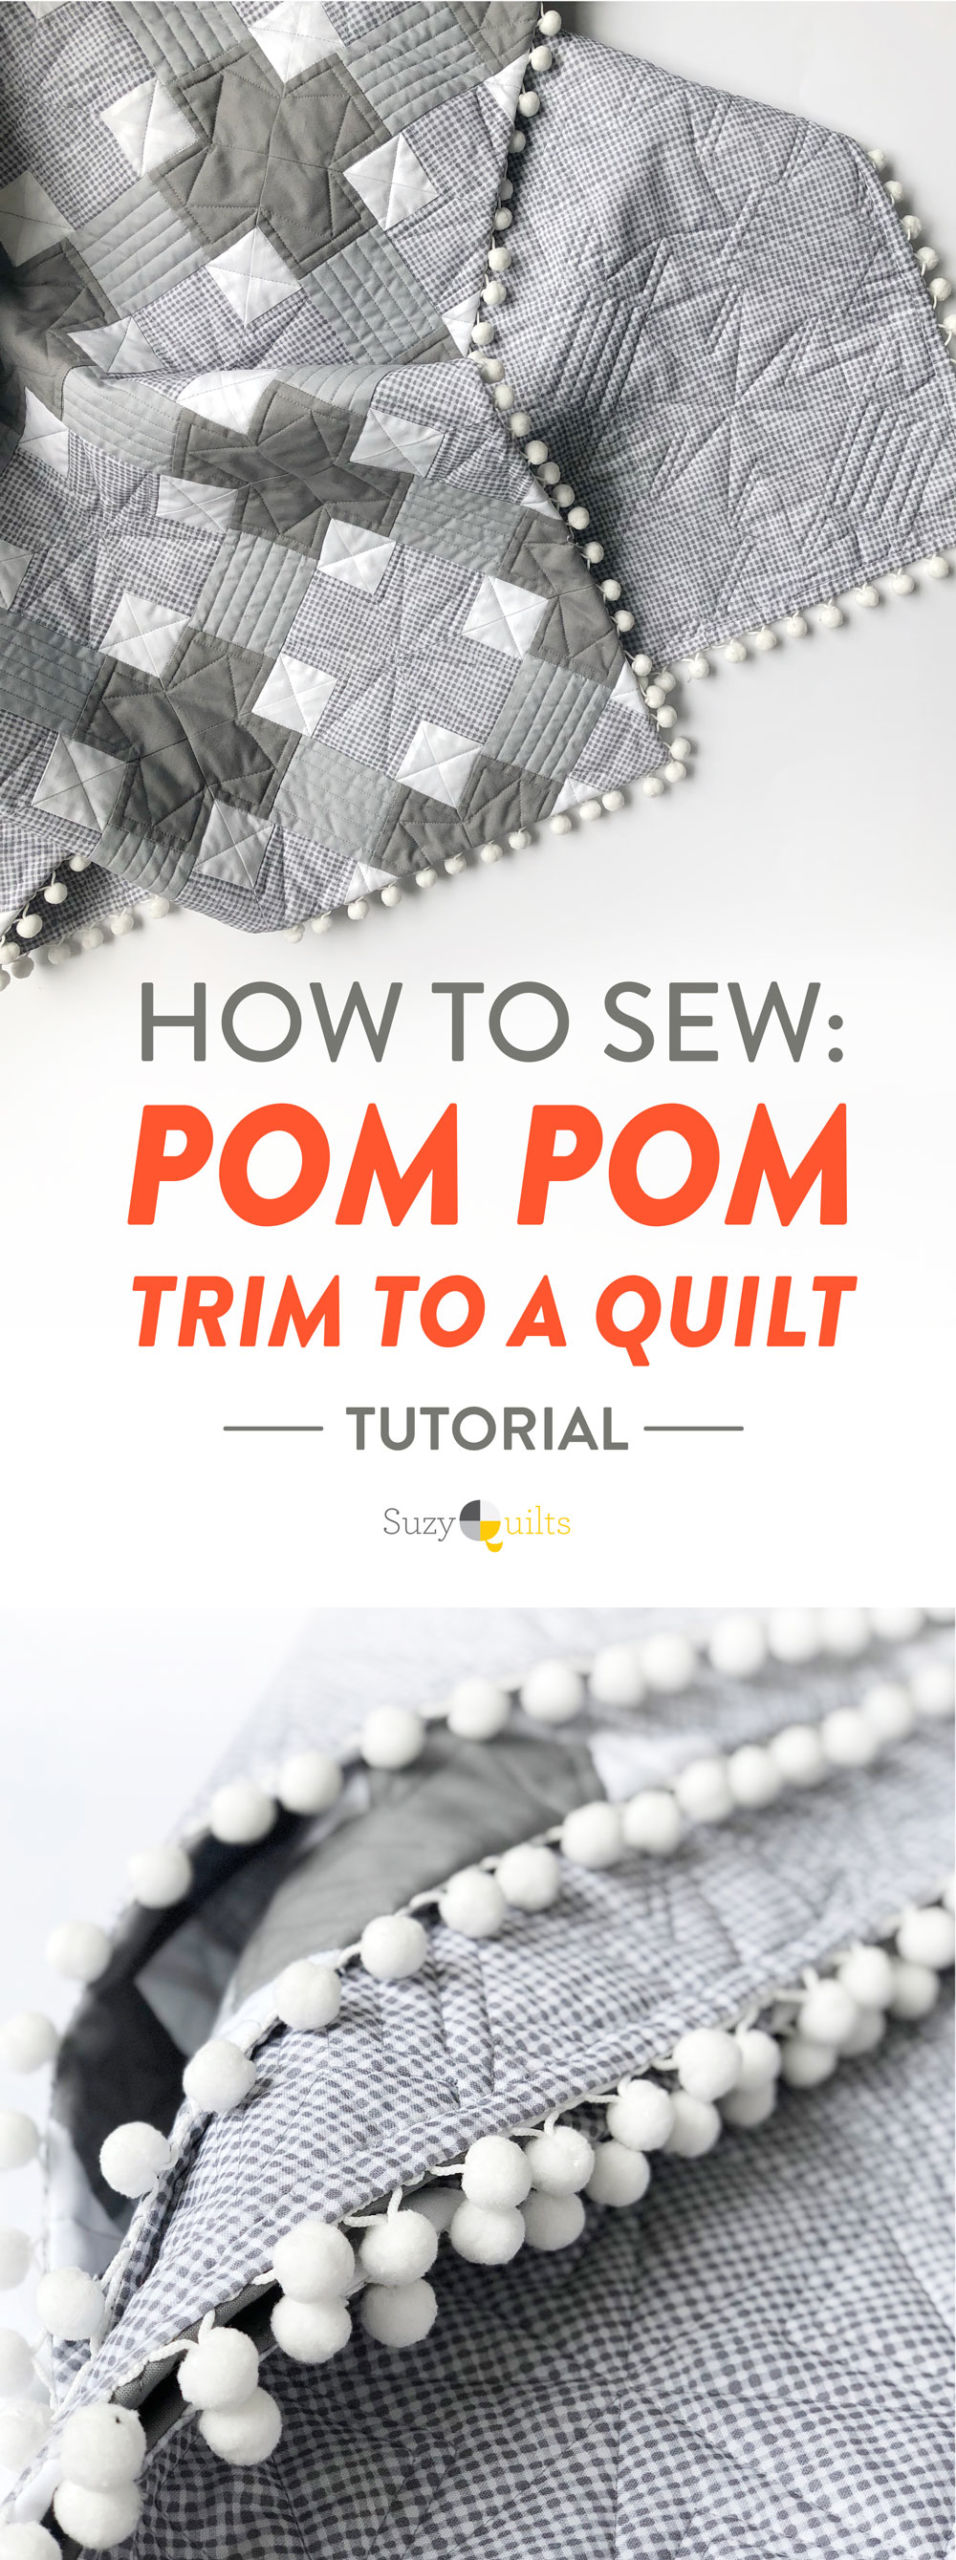 This tutorial will show you step by step how to sew pom pom trim to a quilt. Make your next quilt extra special with this easy sewing tutorial | suzyquilts.com #sewingtutorial #pompoms